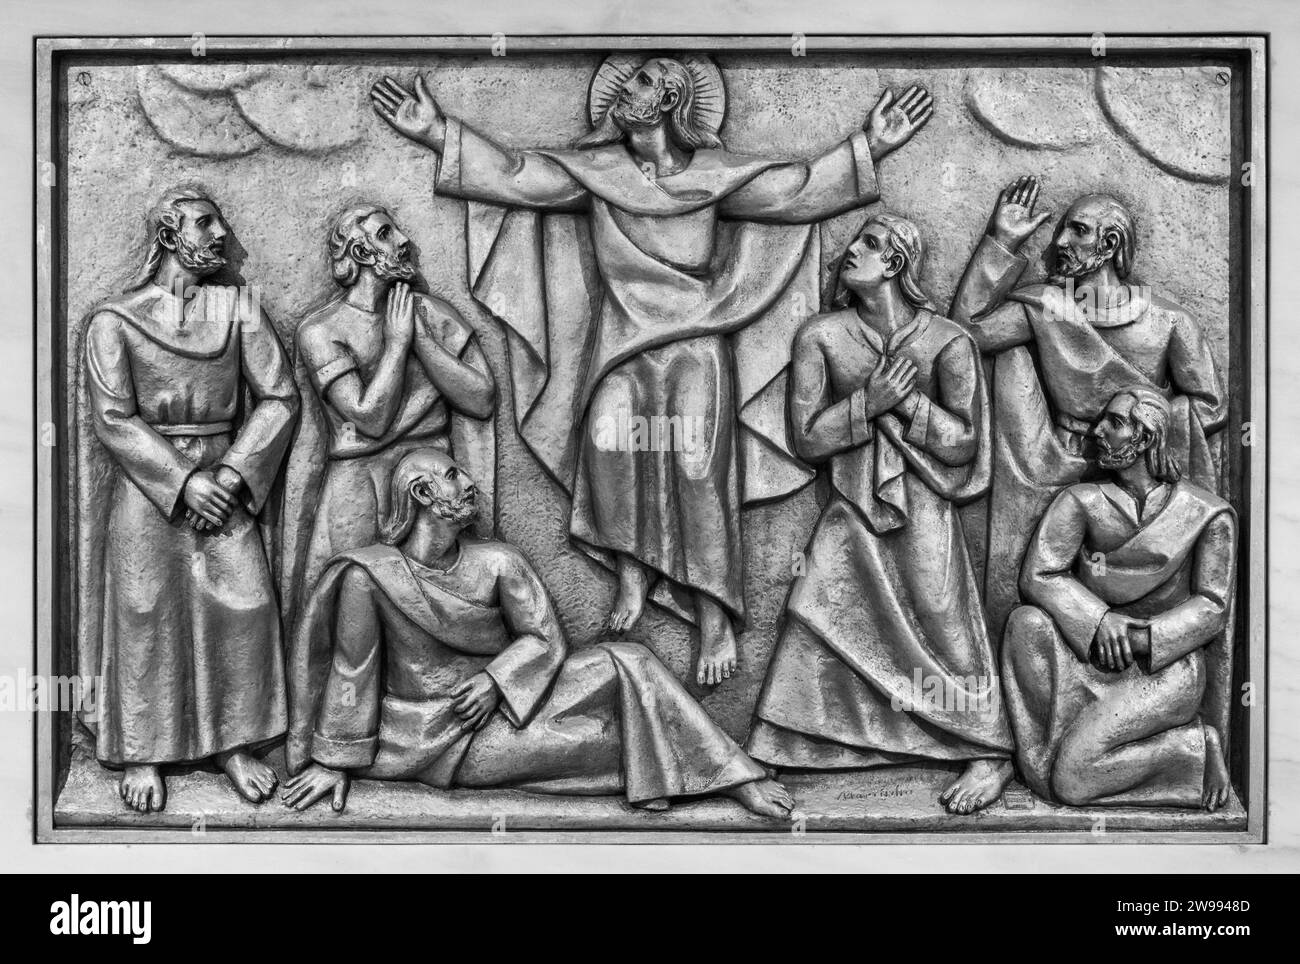 The Ascension of Jesus into Heaven – Second Glorious Mystery. A relief sculpture in the Basilica of Our Lady of the Rosary of Fatima. Stock Photo